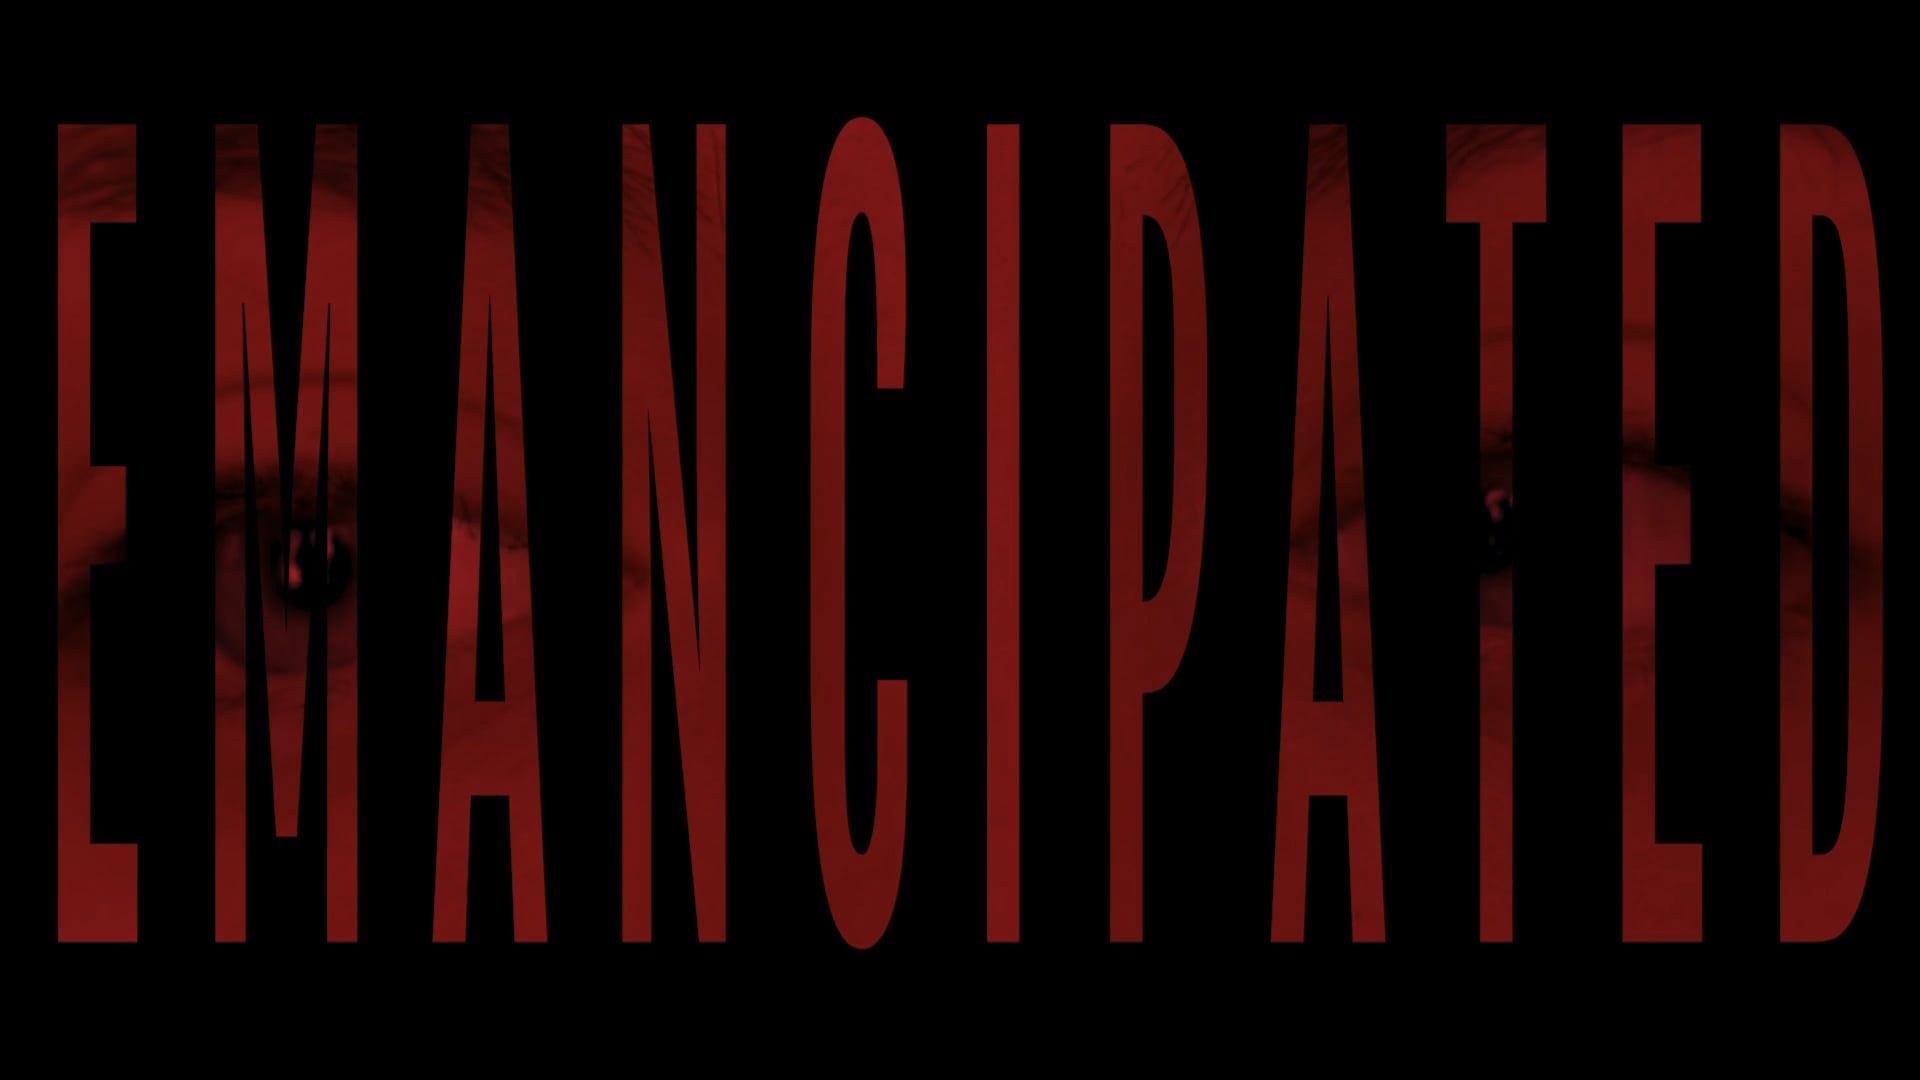 EMANCIPATED - Directed by Abby Tattle